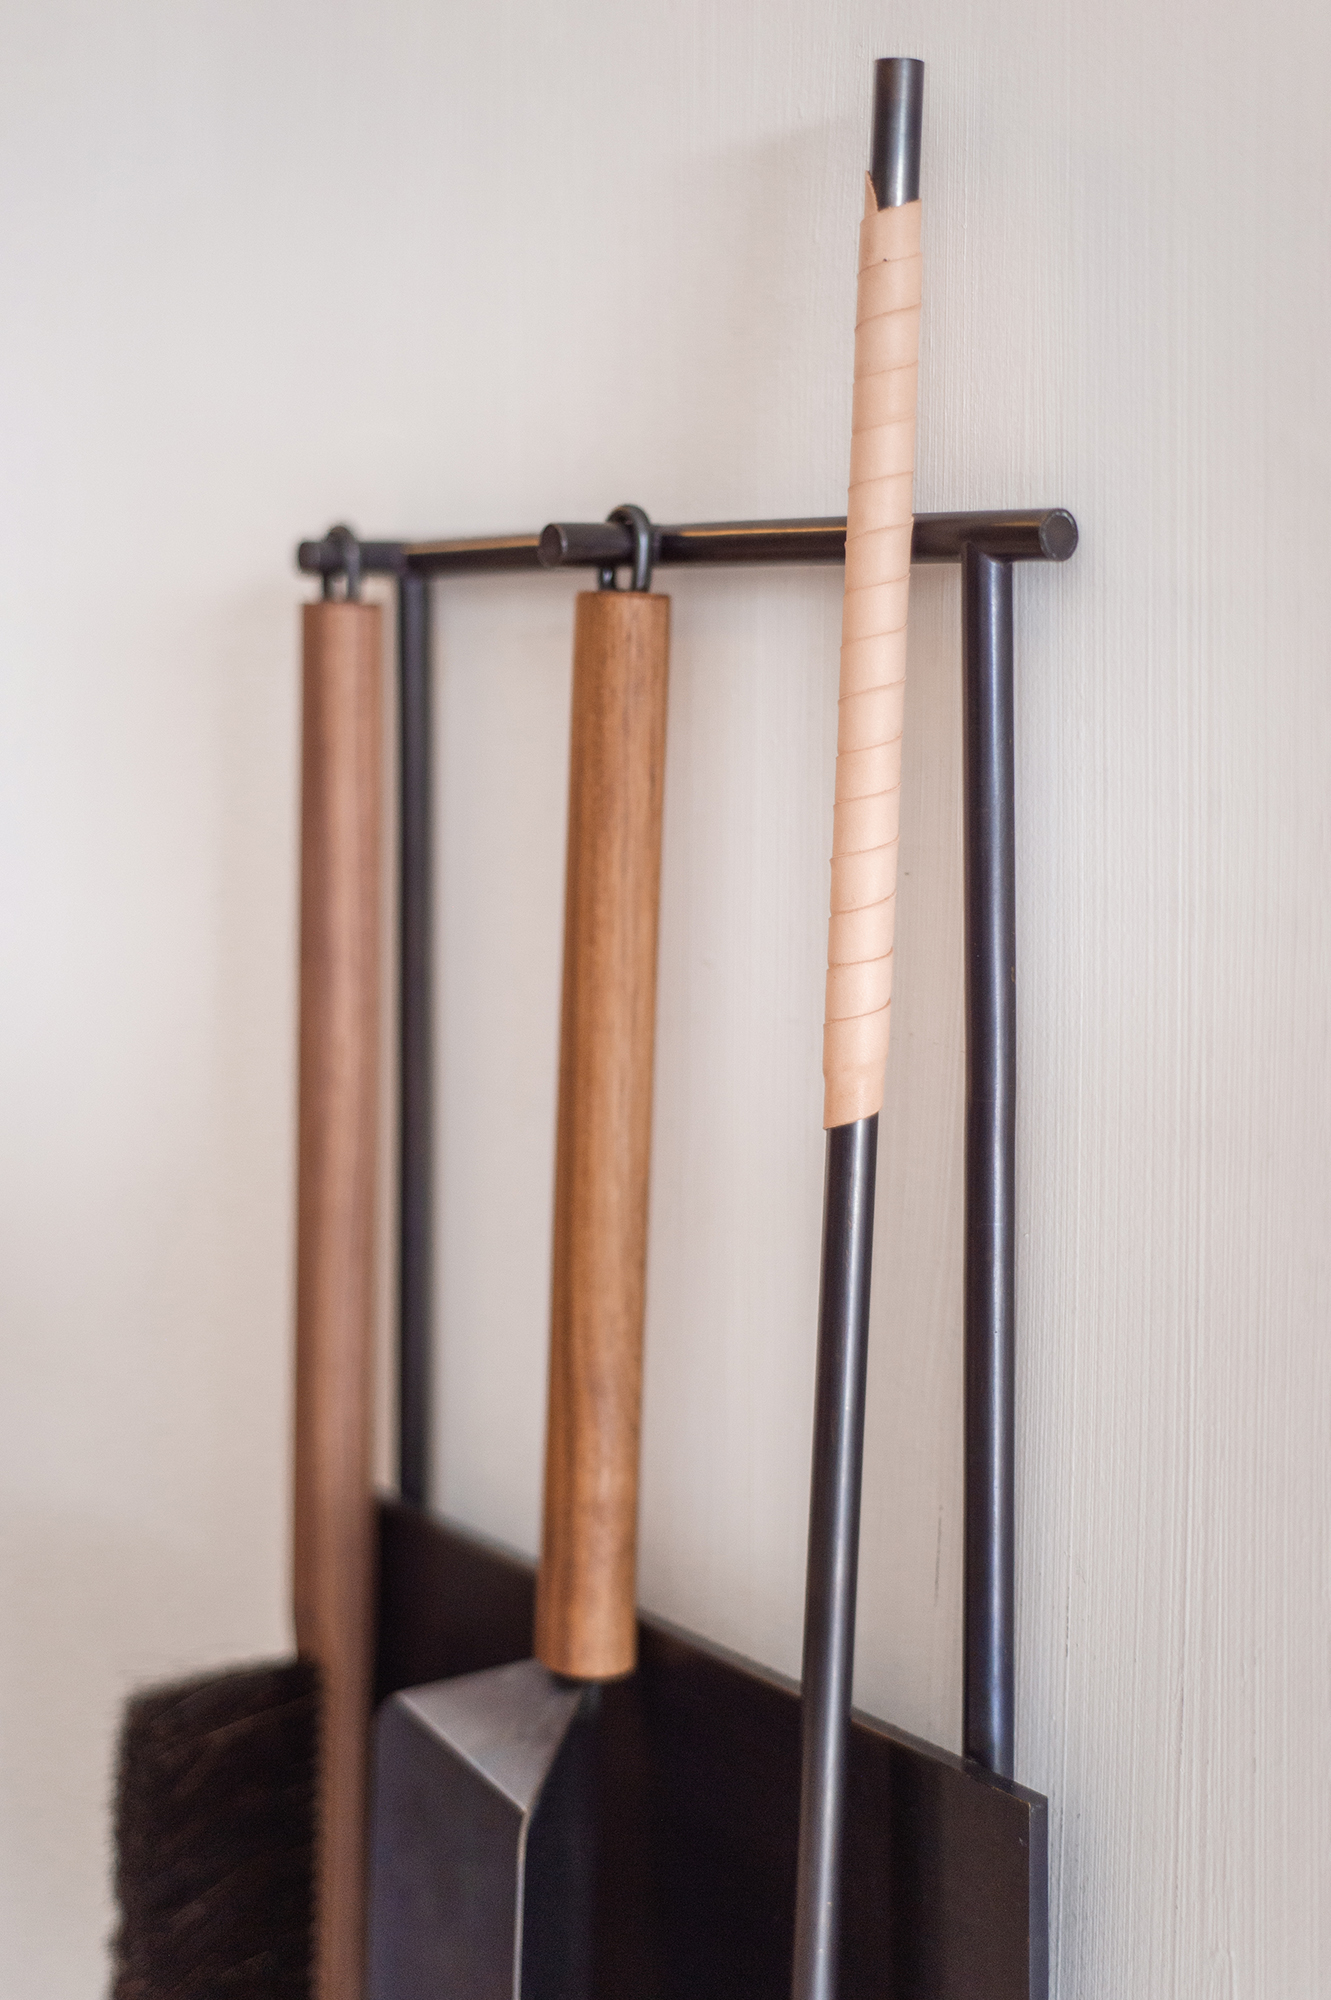 Fire Tools by Thom Fougere for Mjolk brass, oak and natural leather - Mjölk